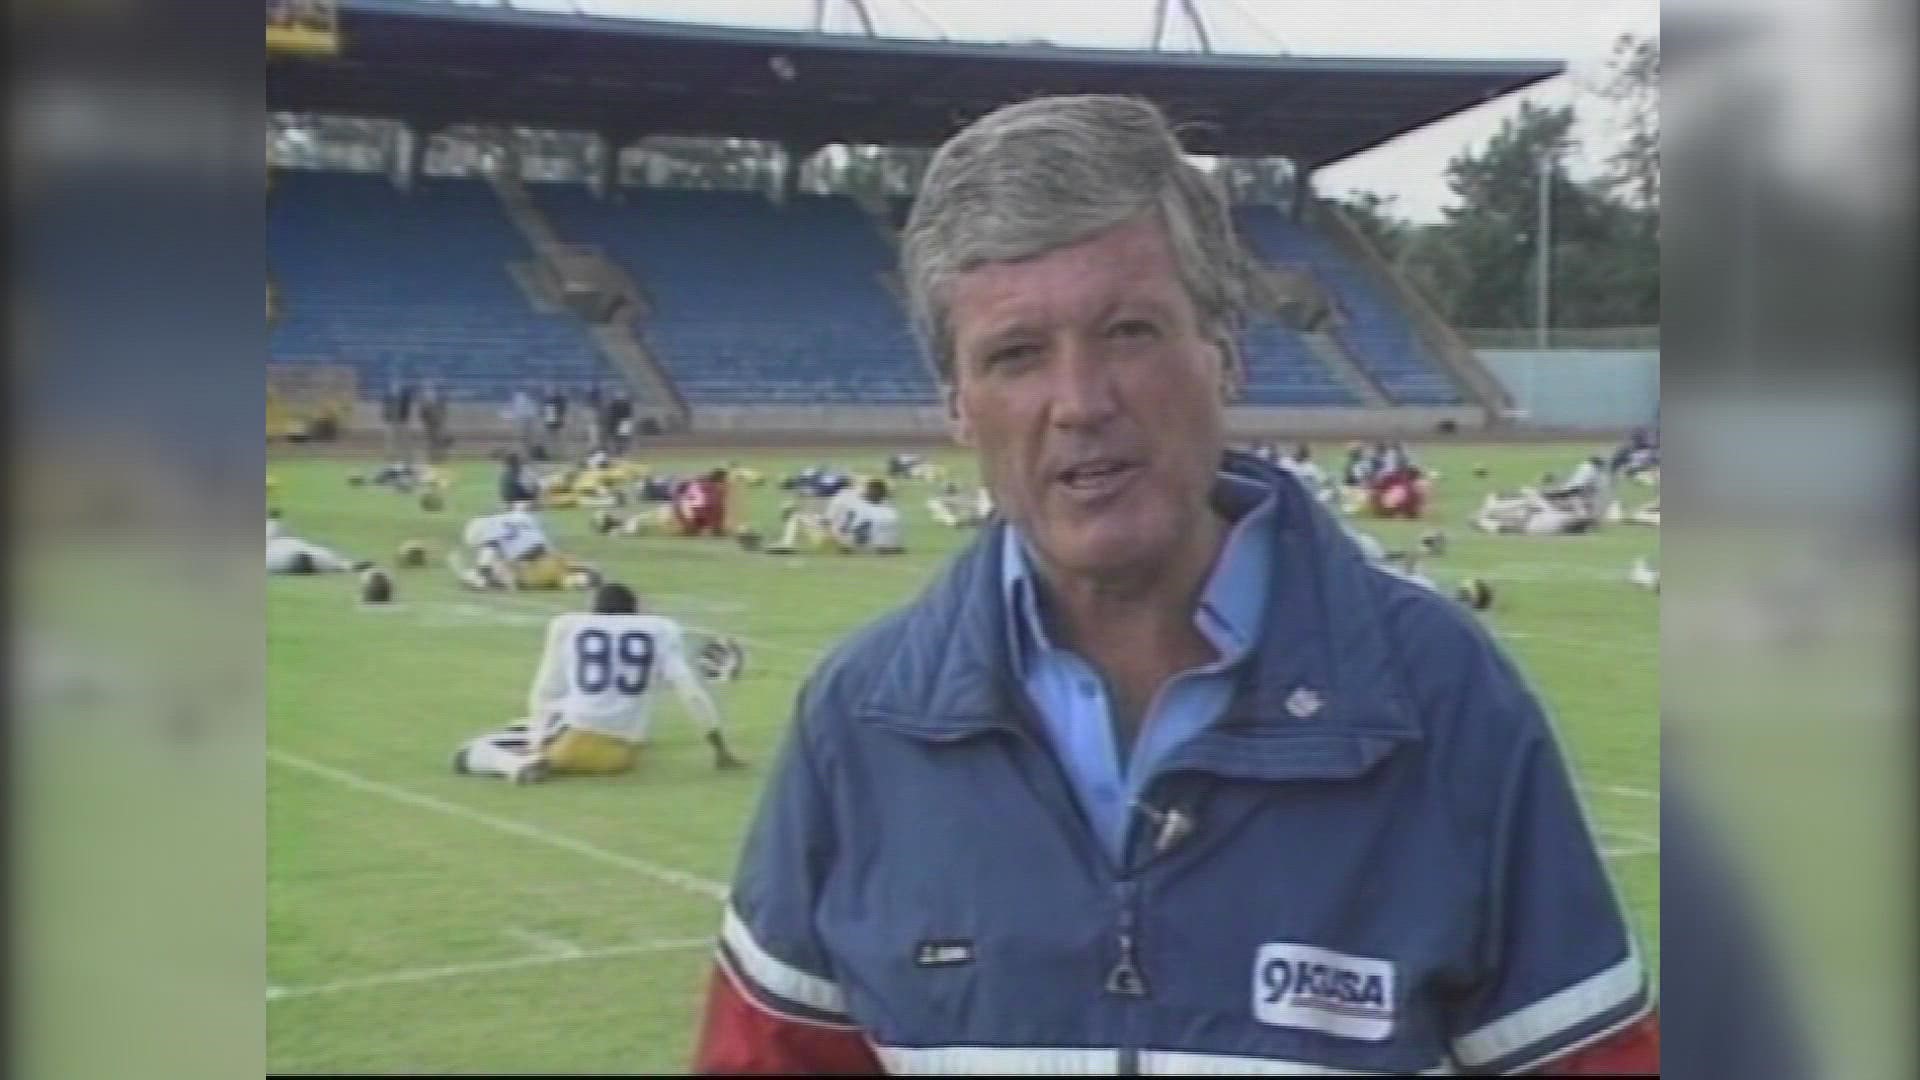 Longtime 9NEWS sportscaster Mike Nolan died in Santa Fe, New Mexico Thursday after a brief illness. He was 85.